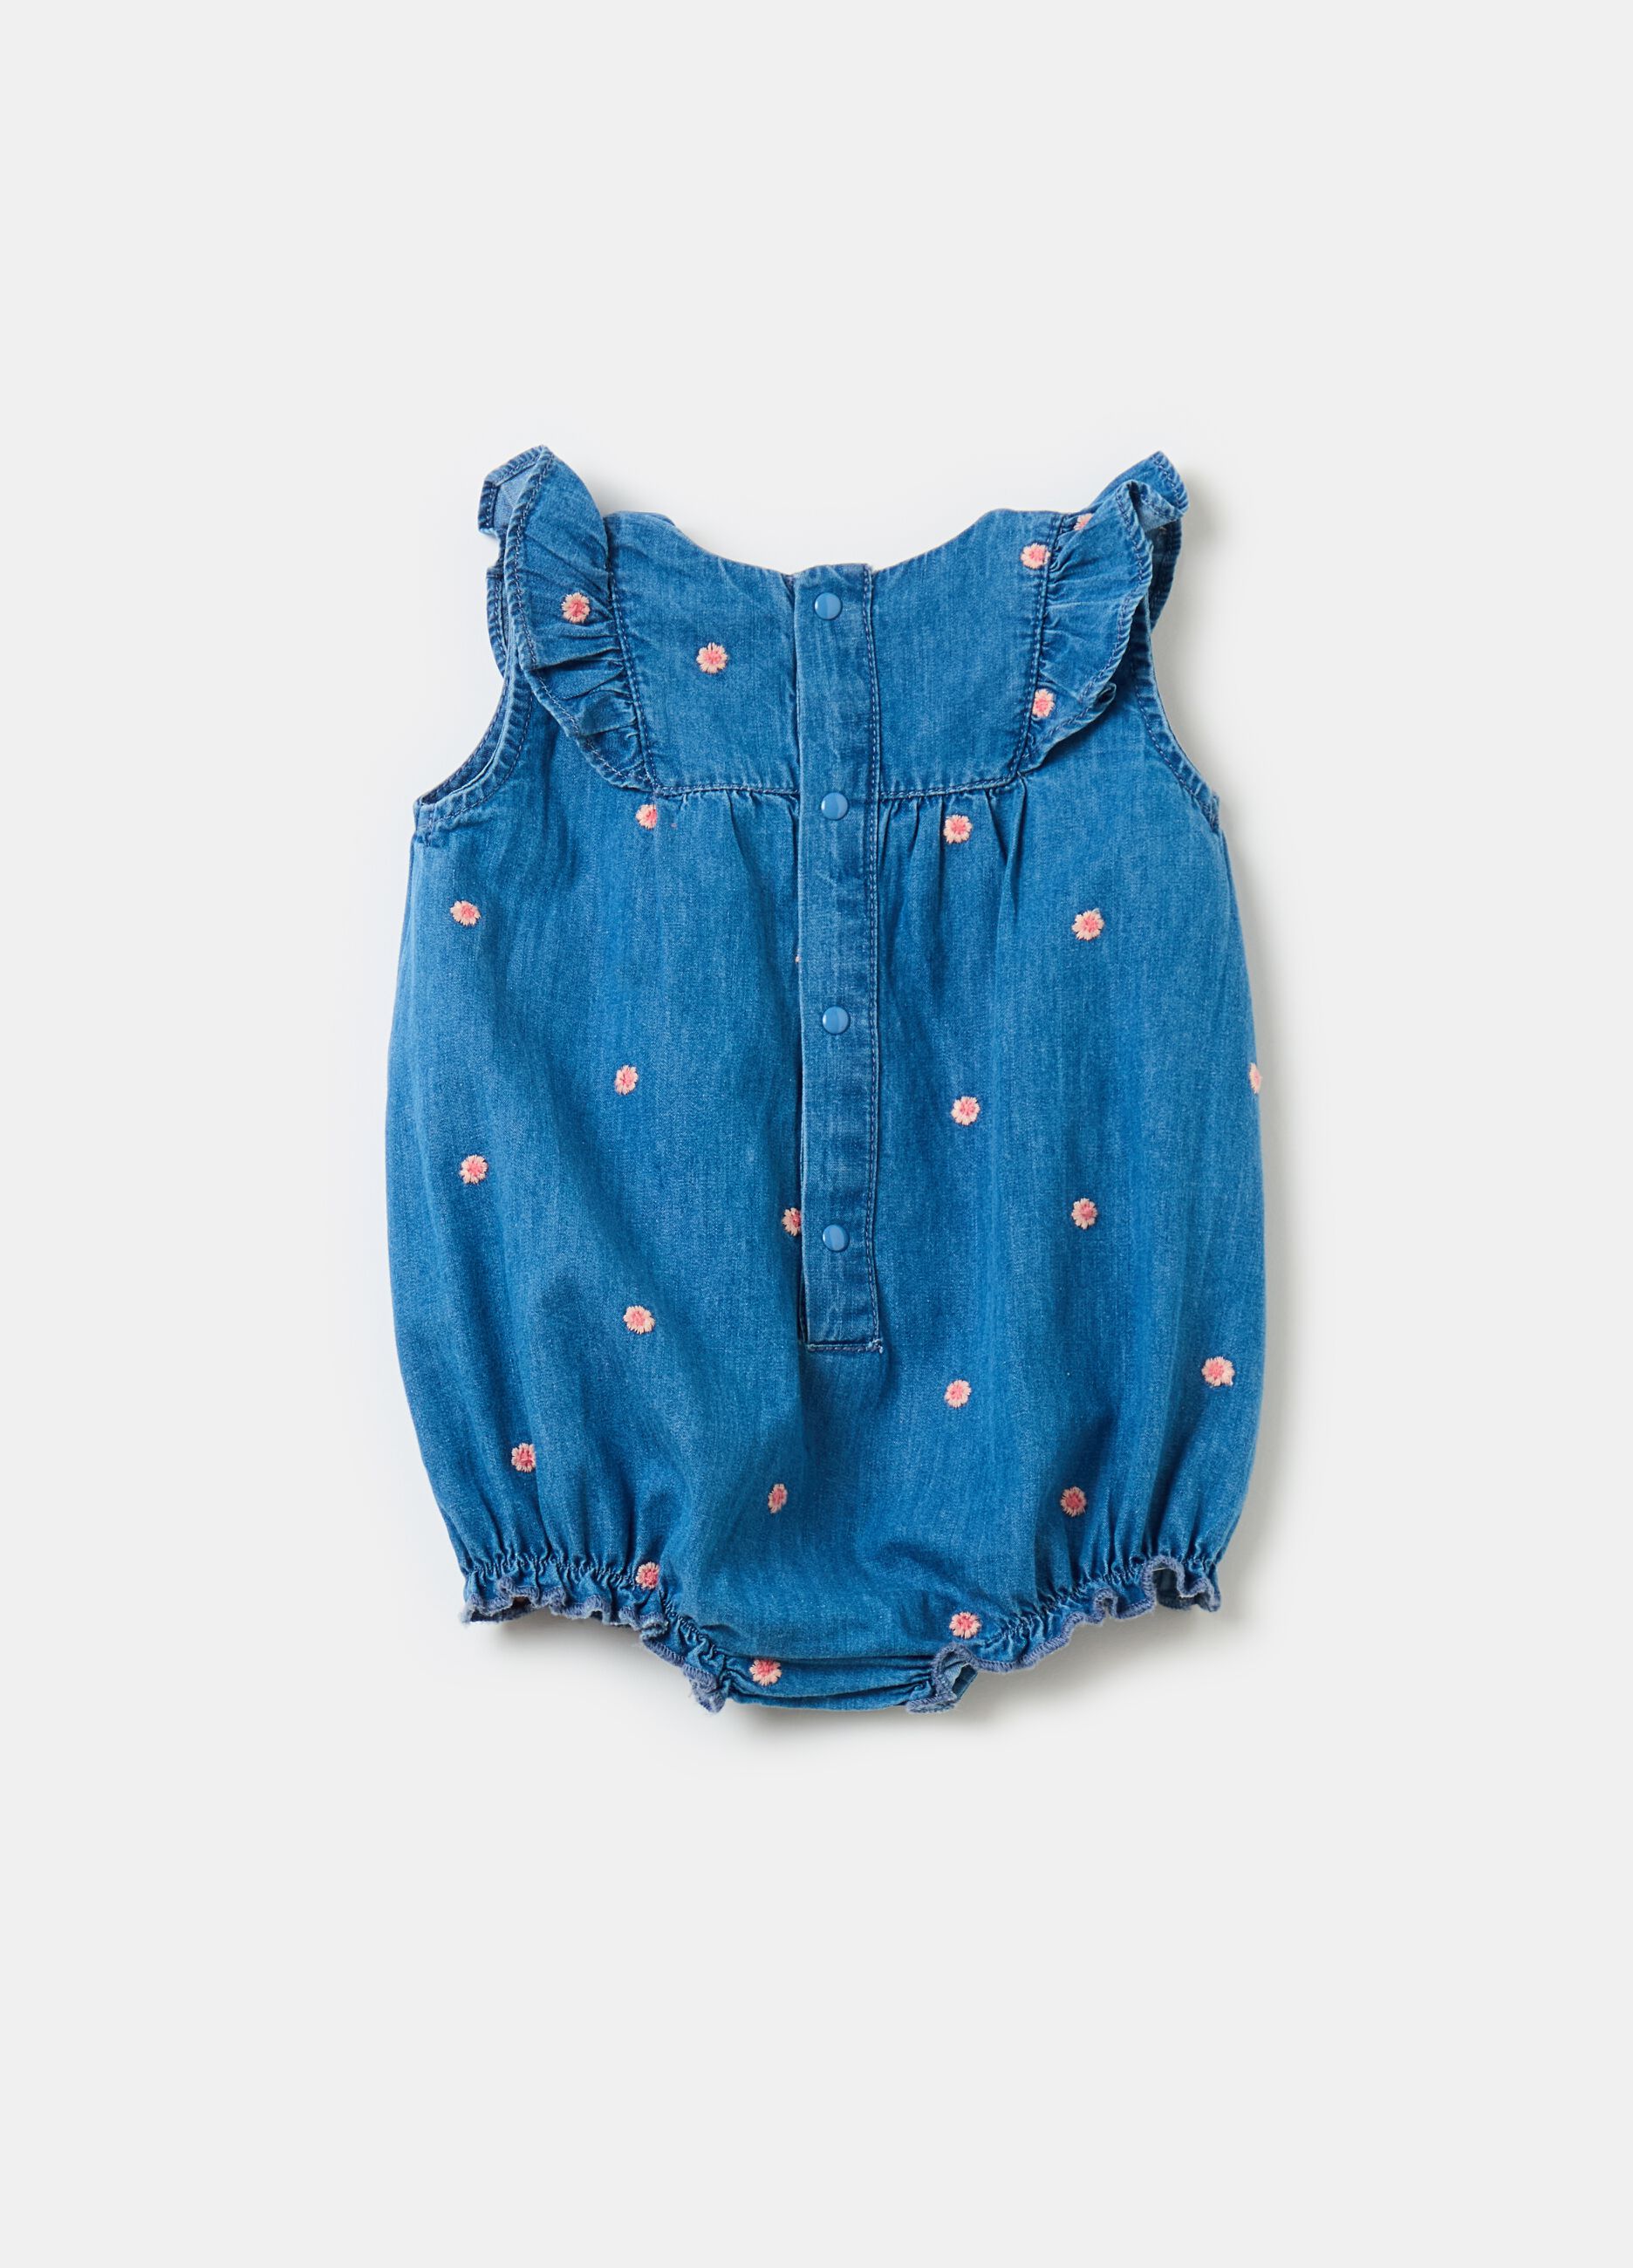 Denim romper suit with small flowers embroidery